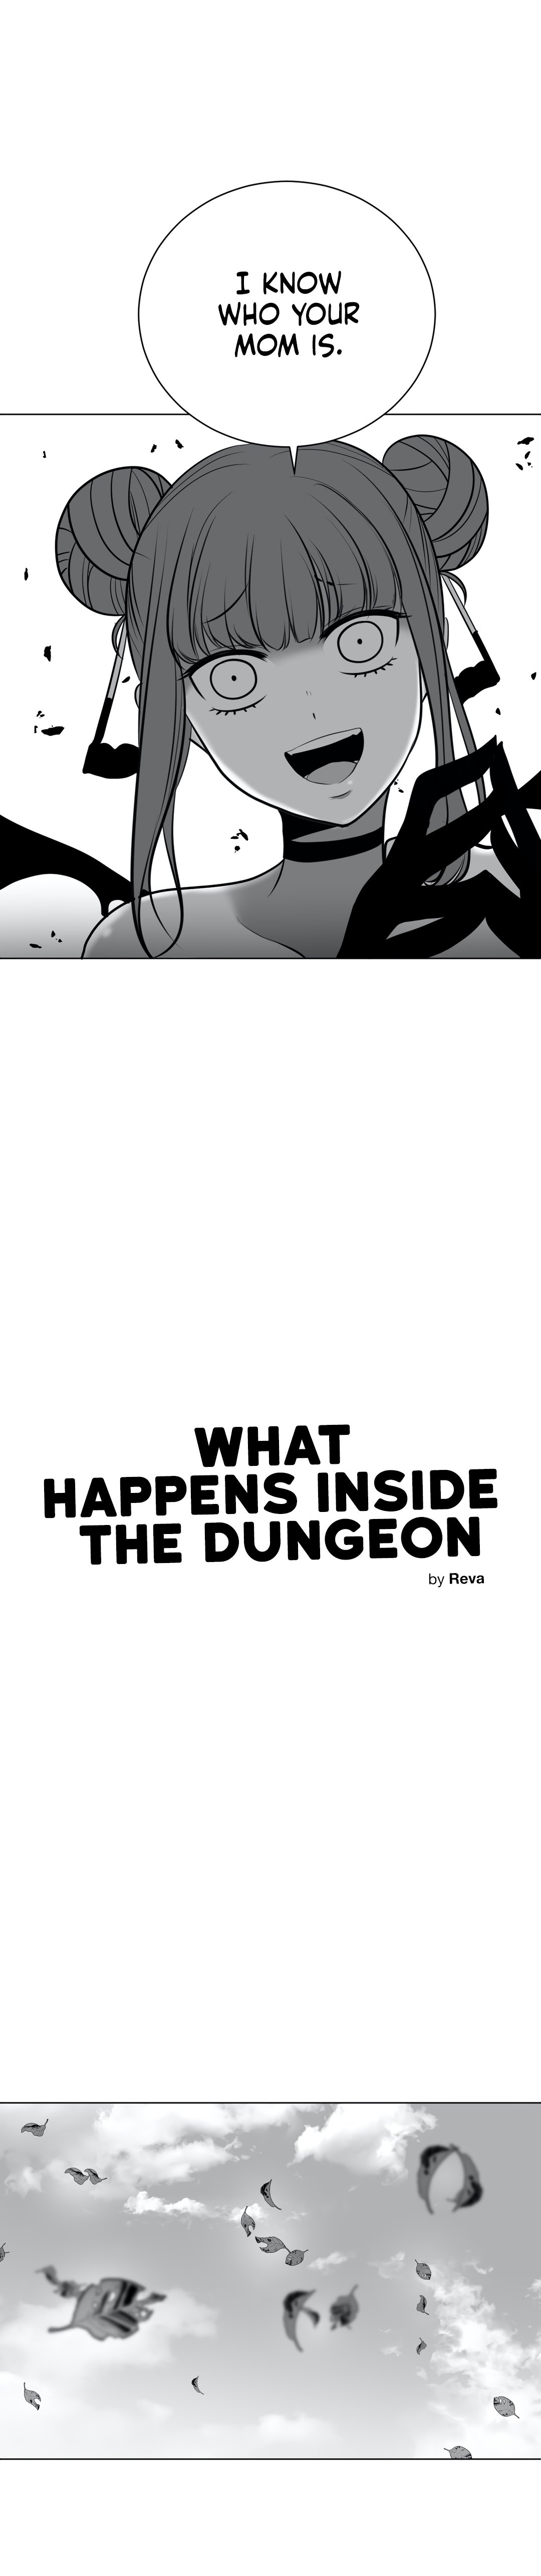 What Happens Inside The Dungeon - Page 2